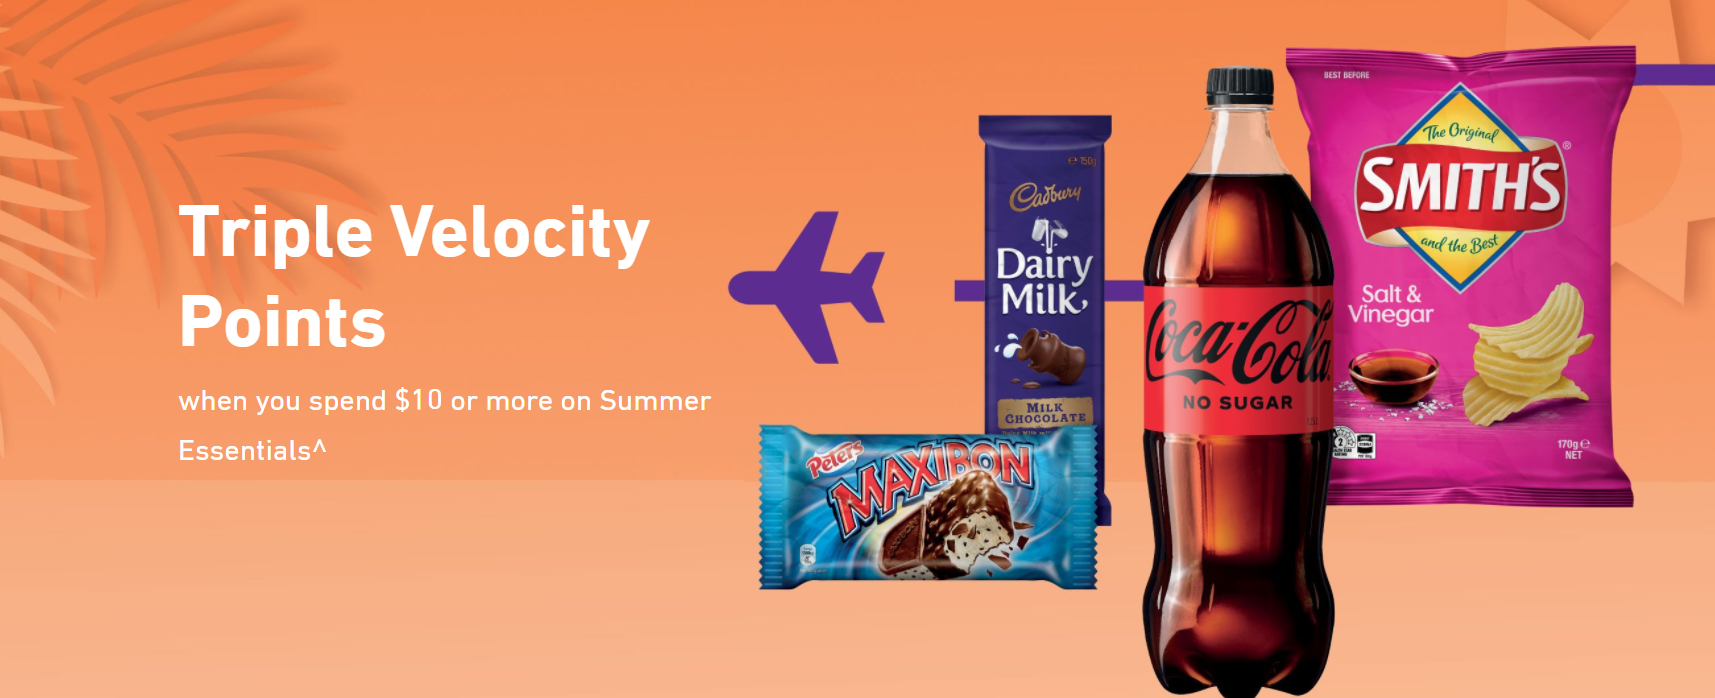 Triple Velocity Points(6 points per $1) when you spend $10 or more on Summer Essentials